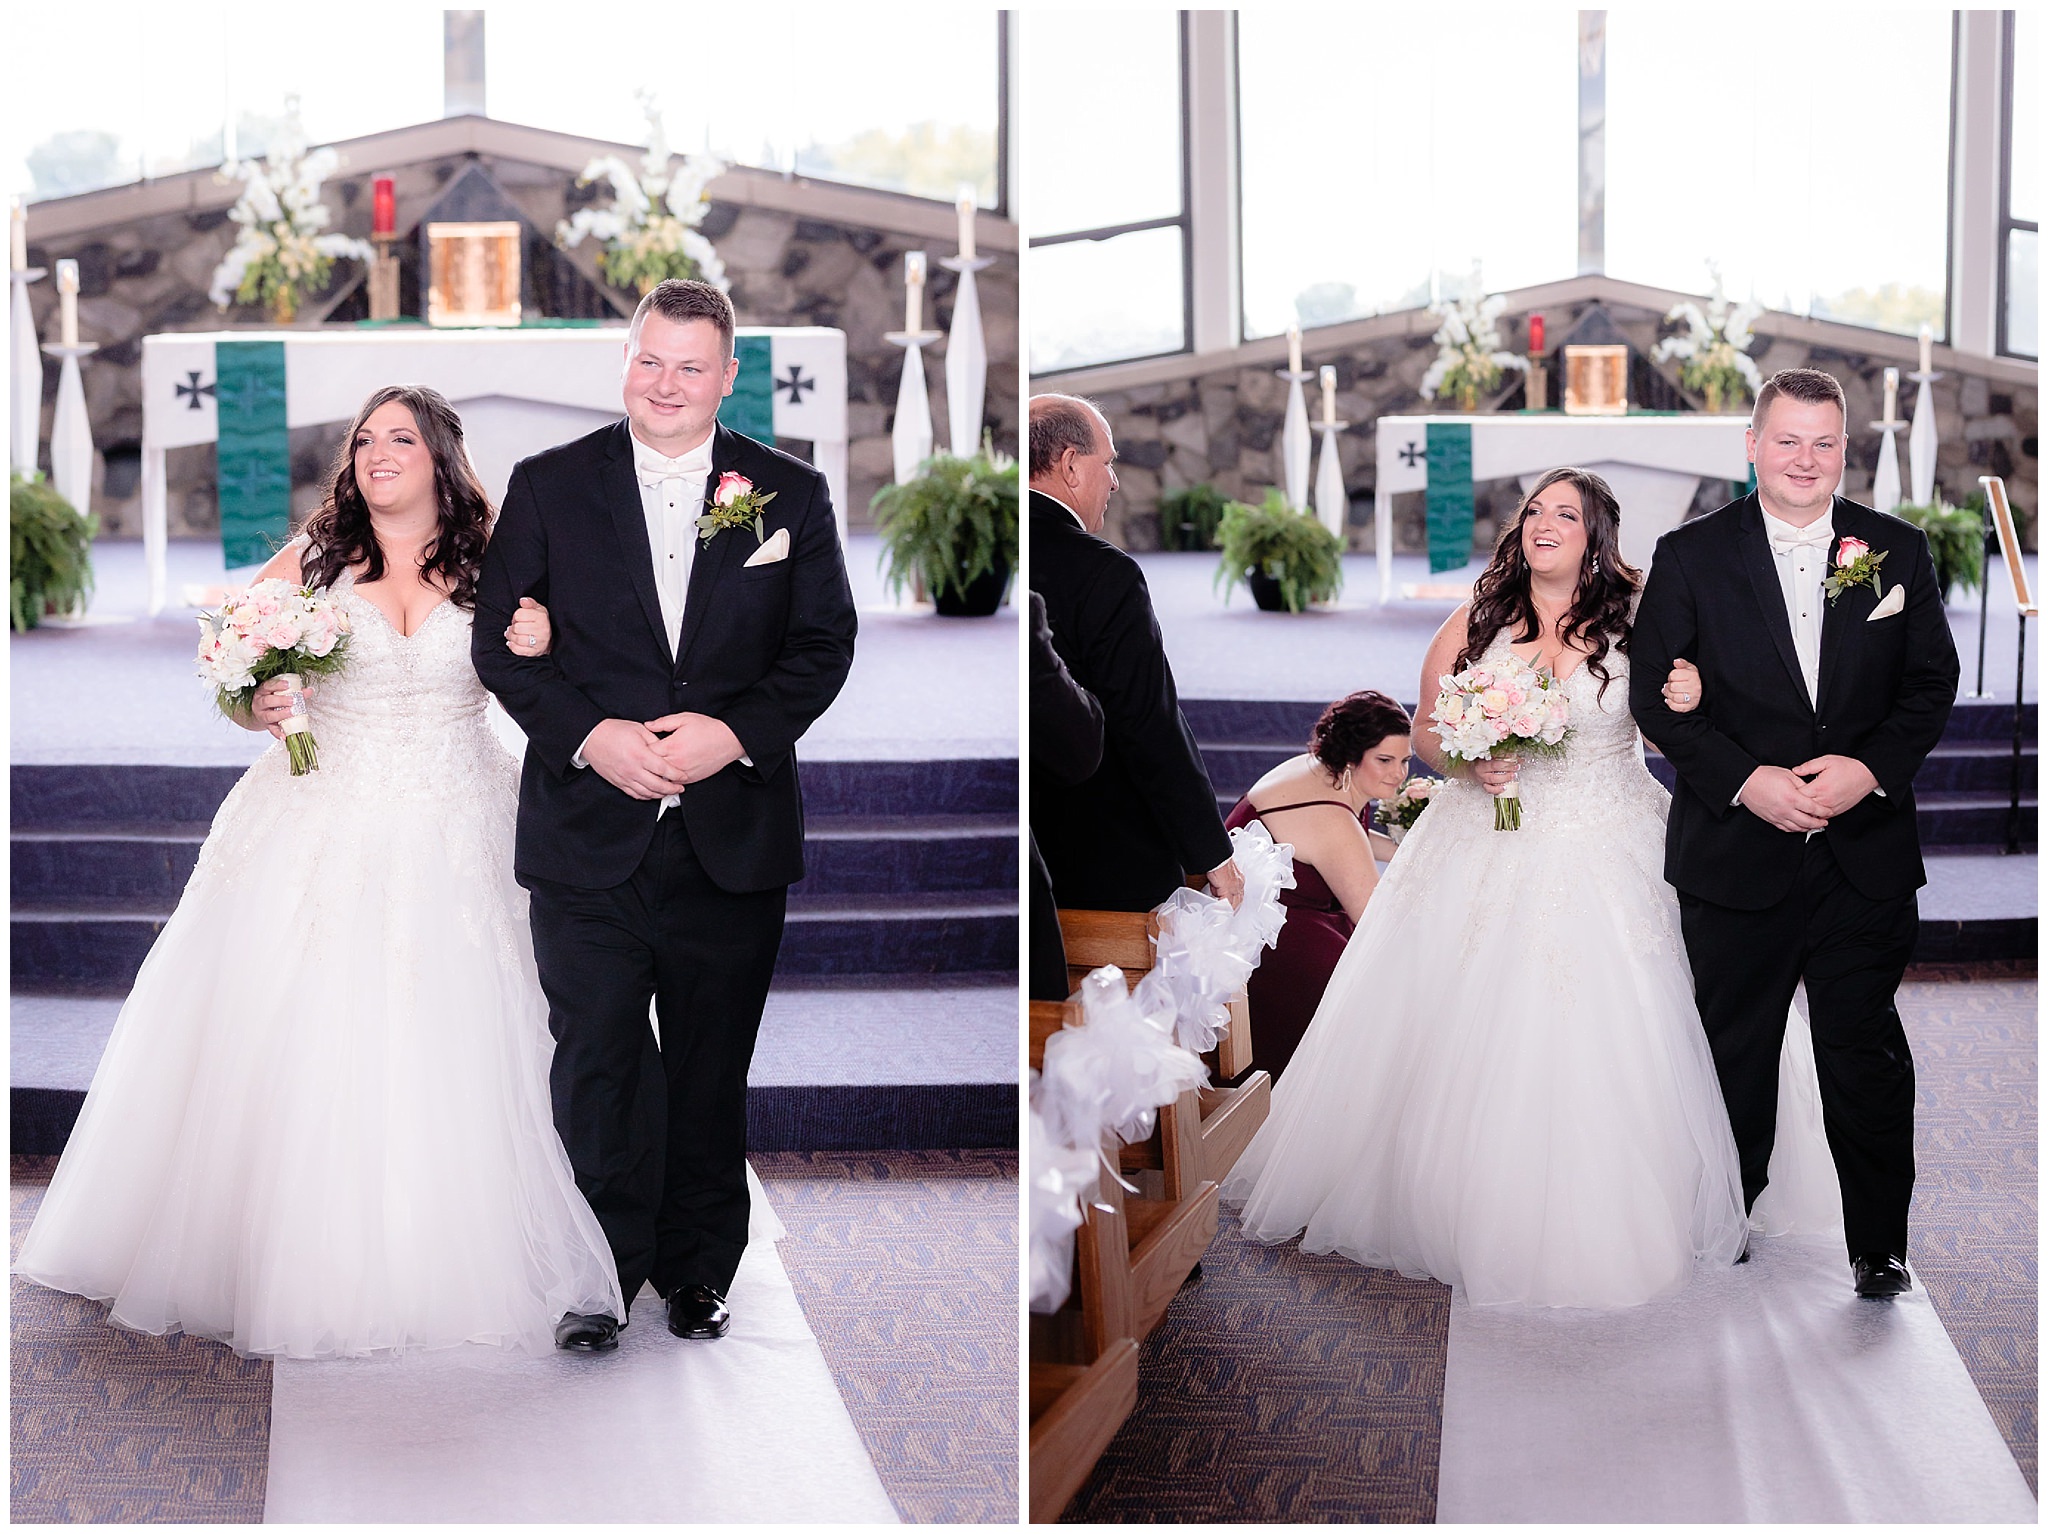 Newlyweds exit their ceremony at St. Malachy